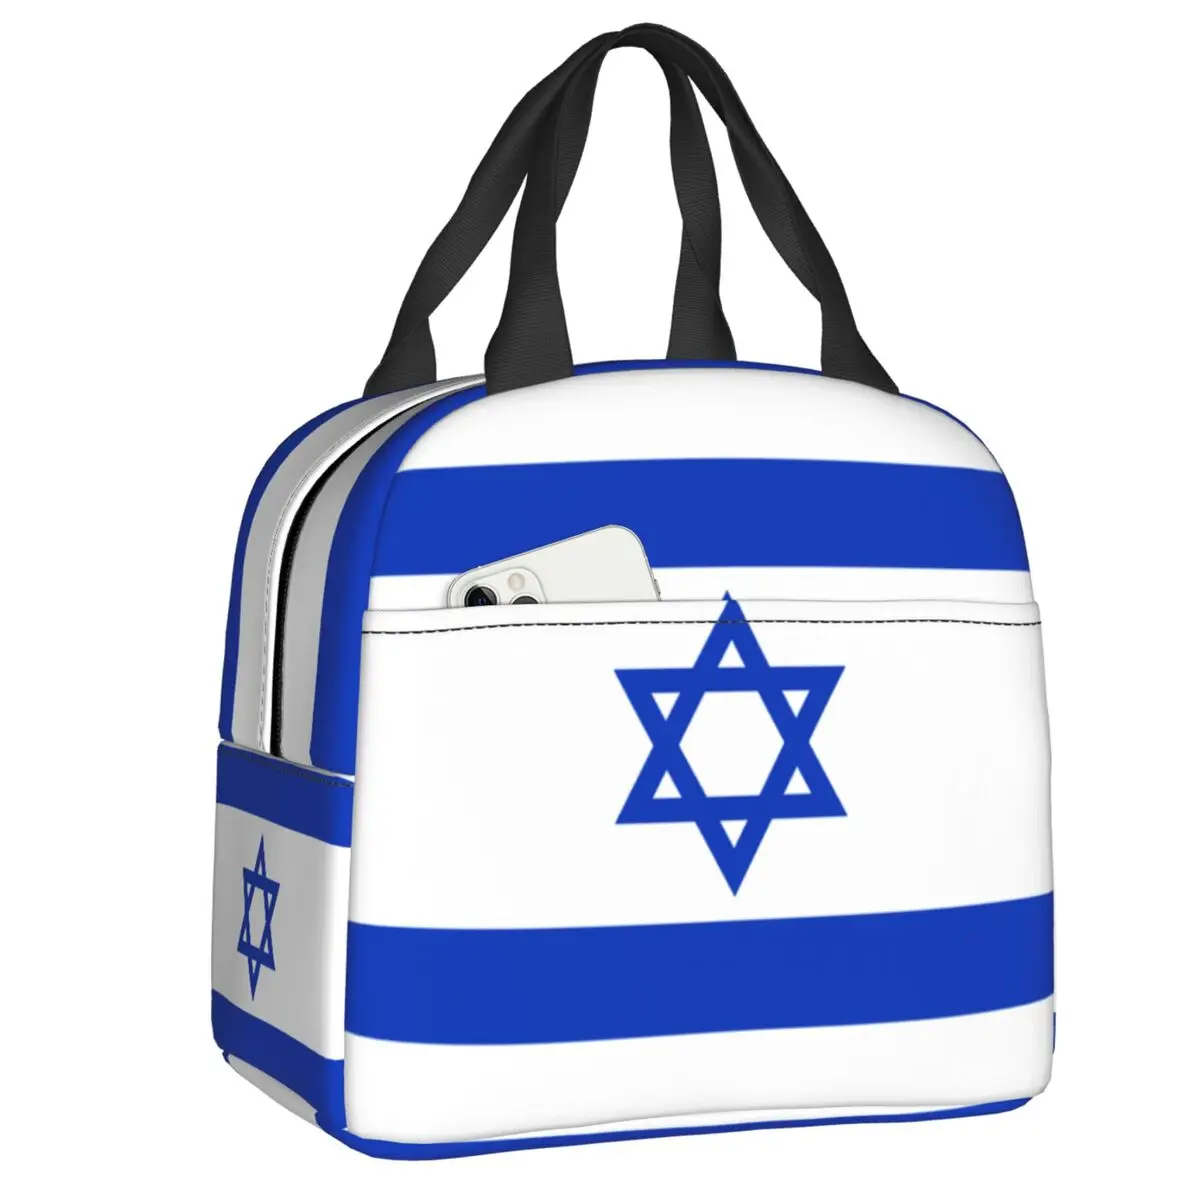 

Flag Of Israel Portable Lunch Box for Women Leakproof Patriotic Thermal Cooler Food Insulated Lunch Bag School Children Student